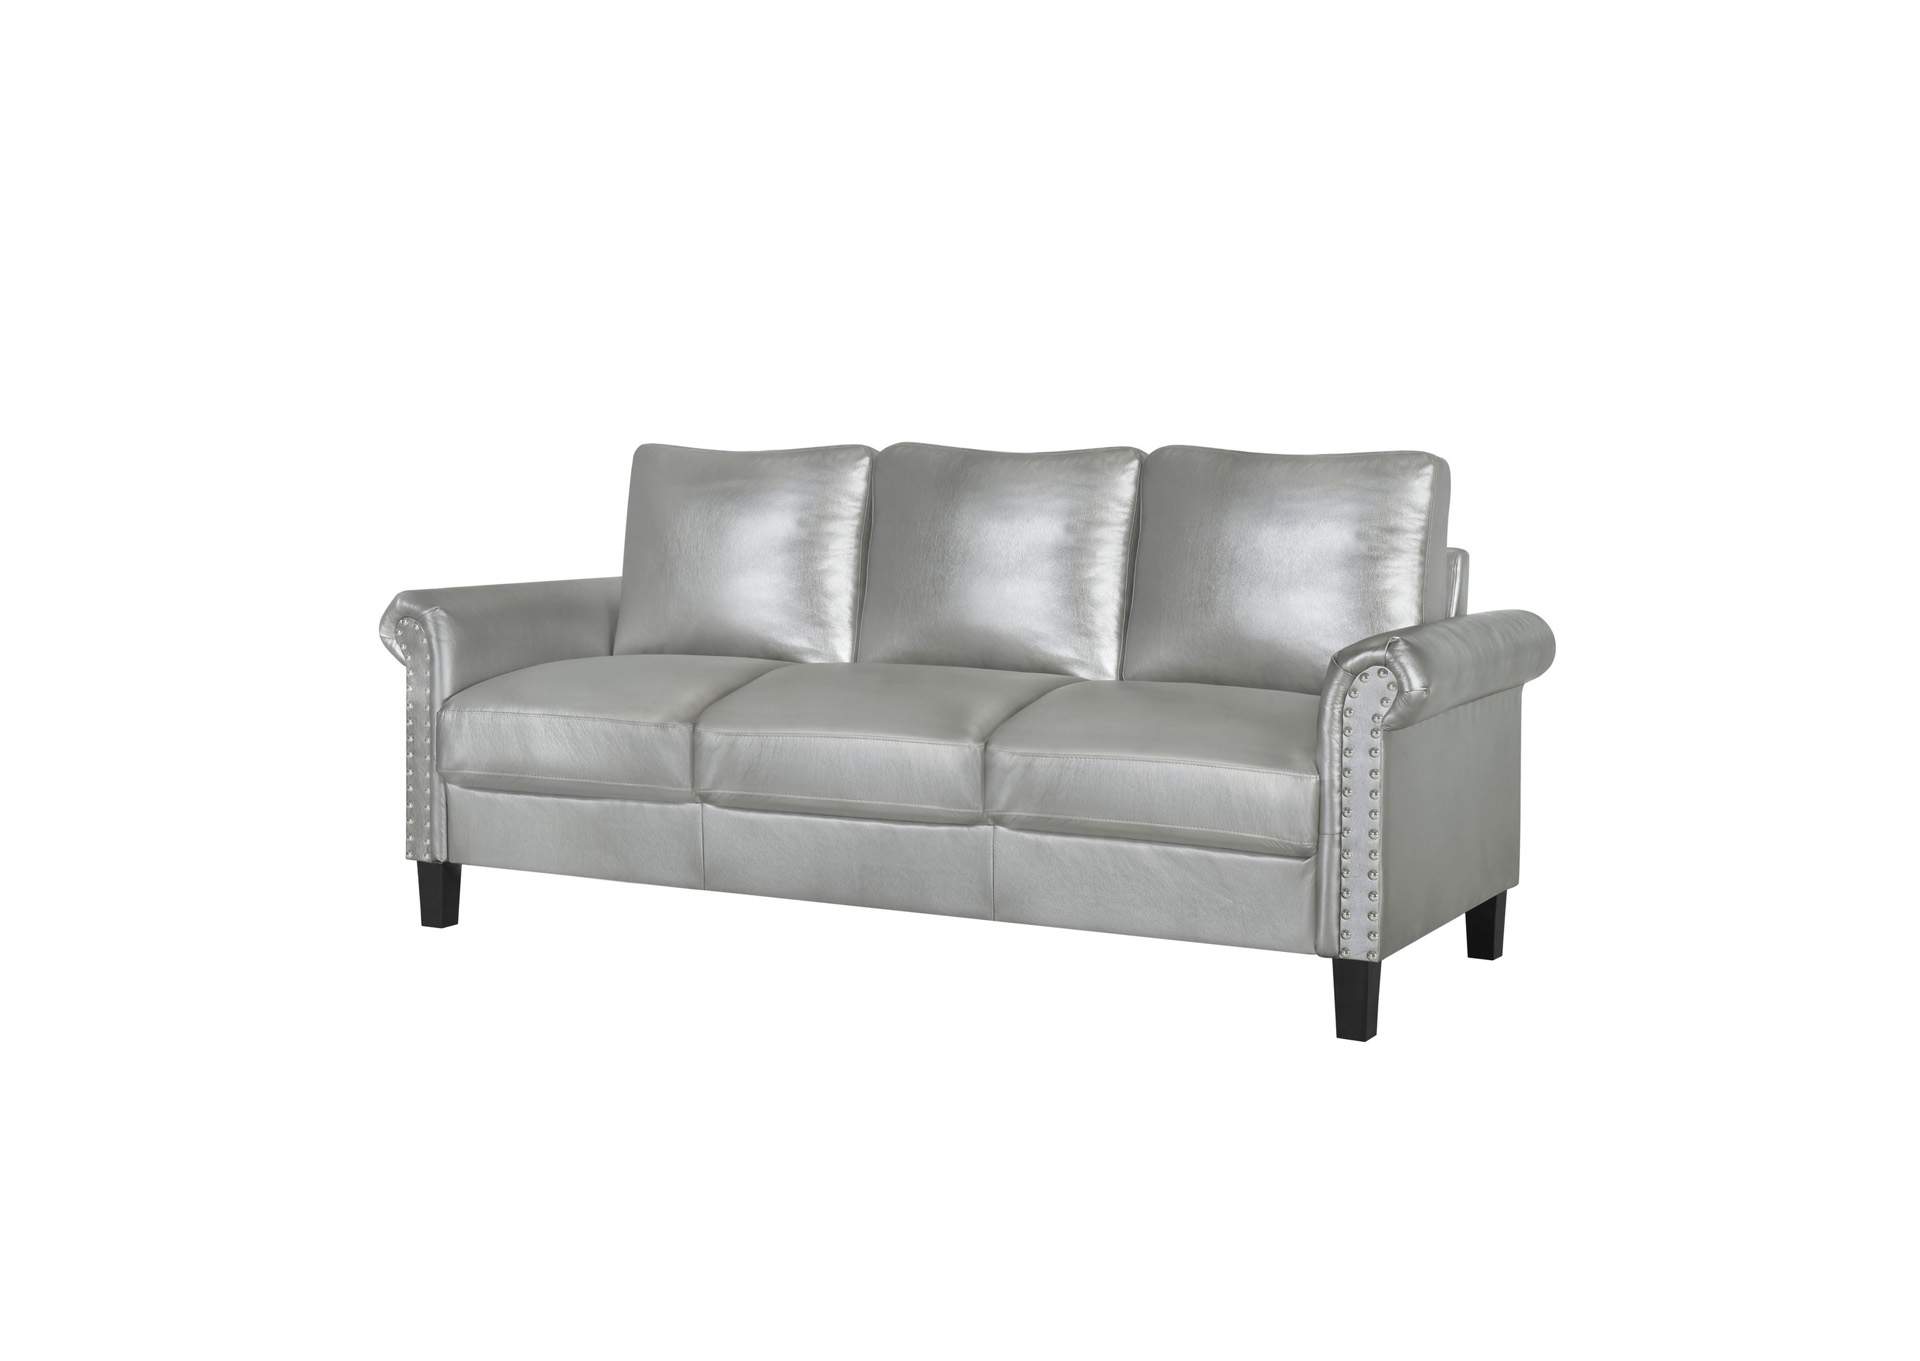 Silver Faux Leather Sofa Best, Silver Leather Furniture